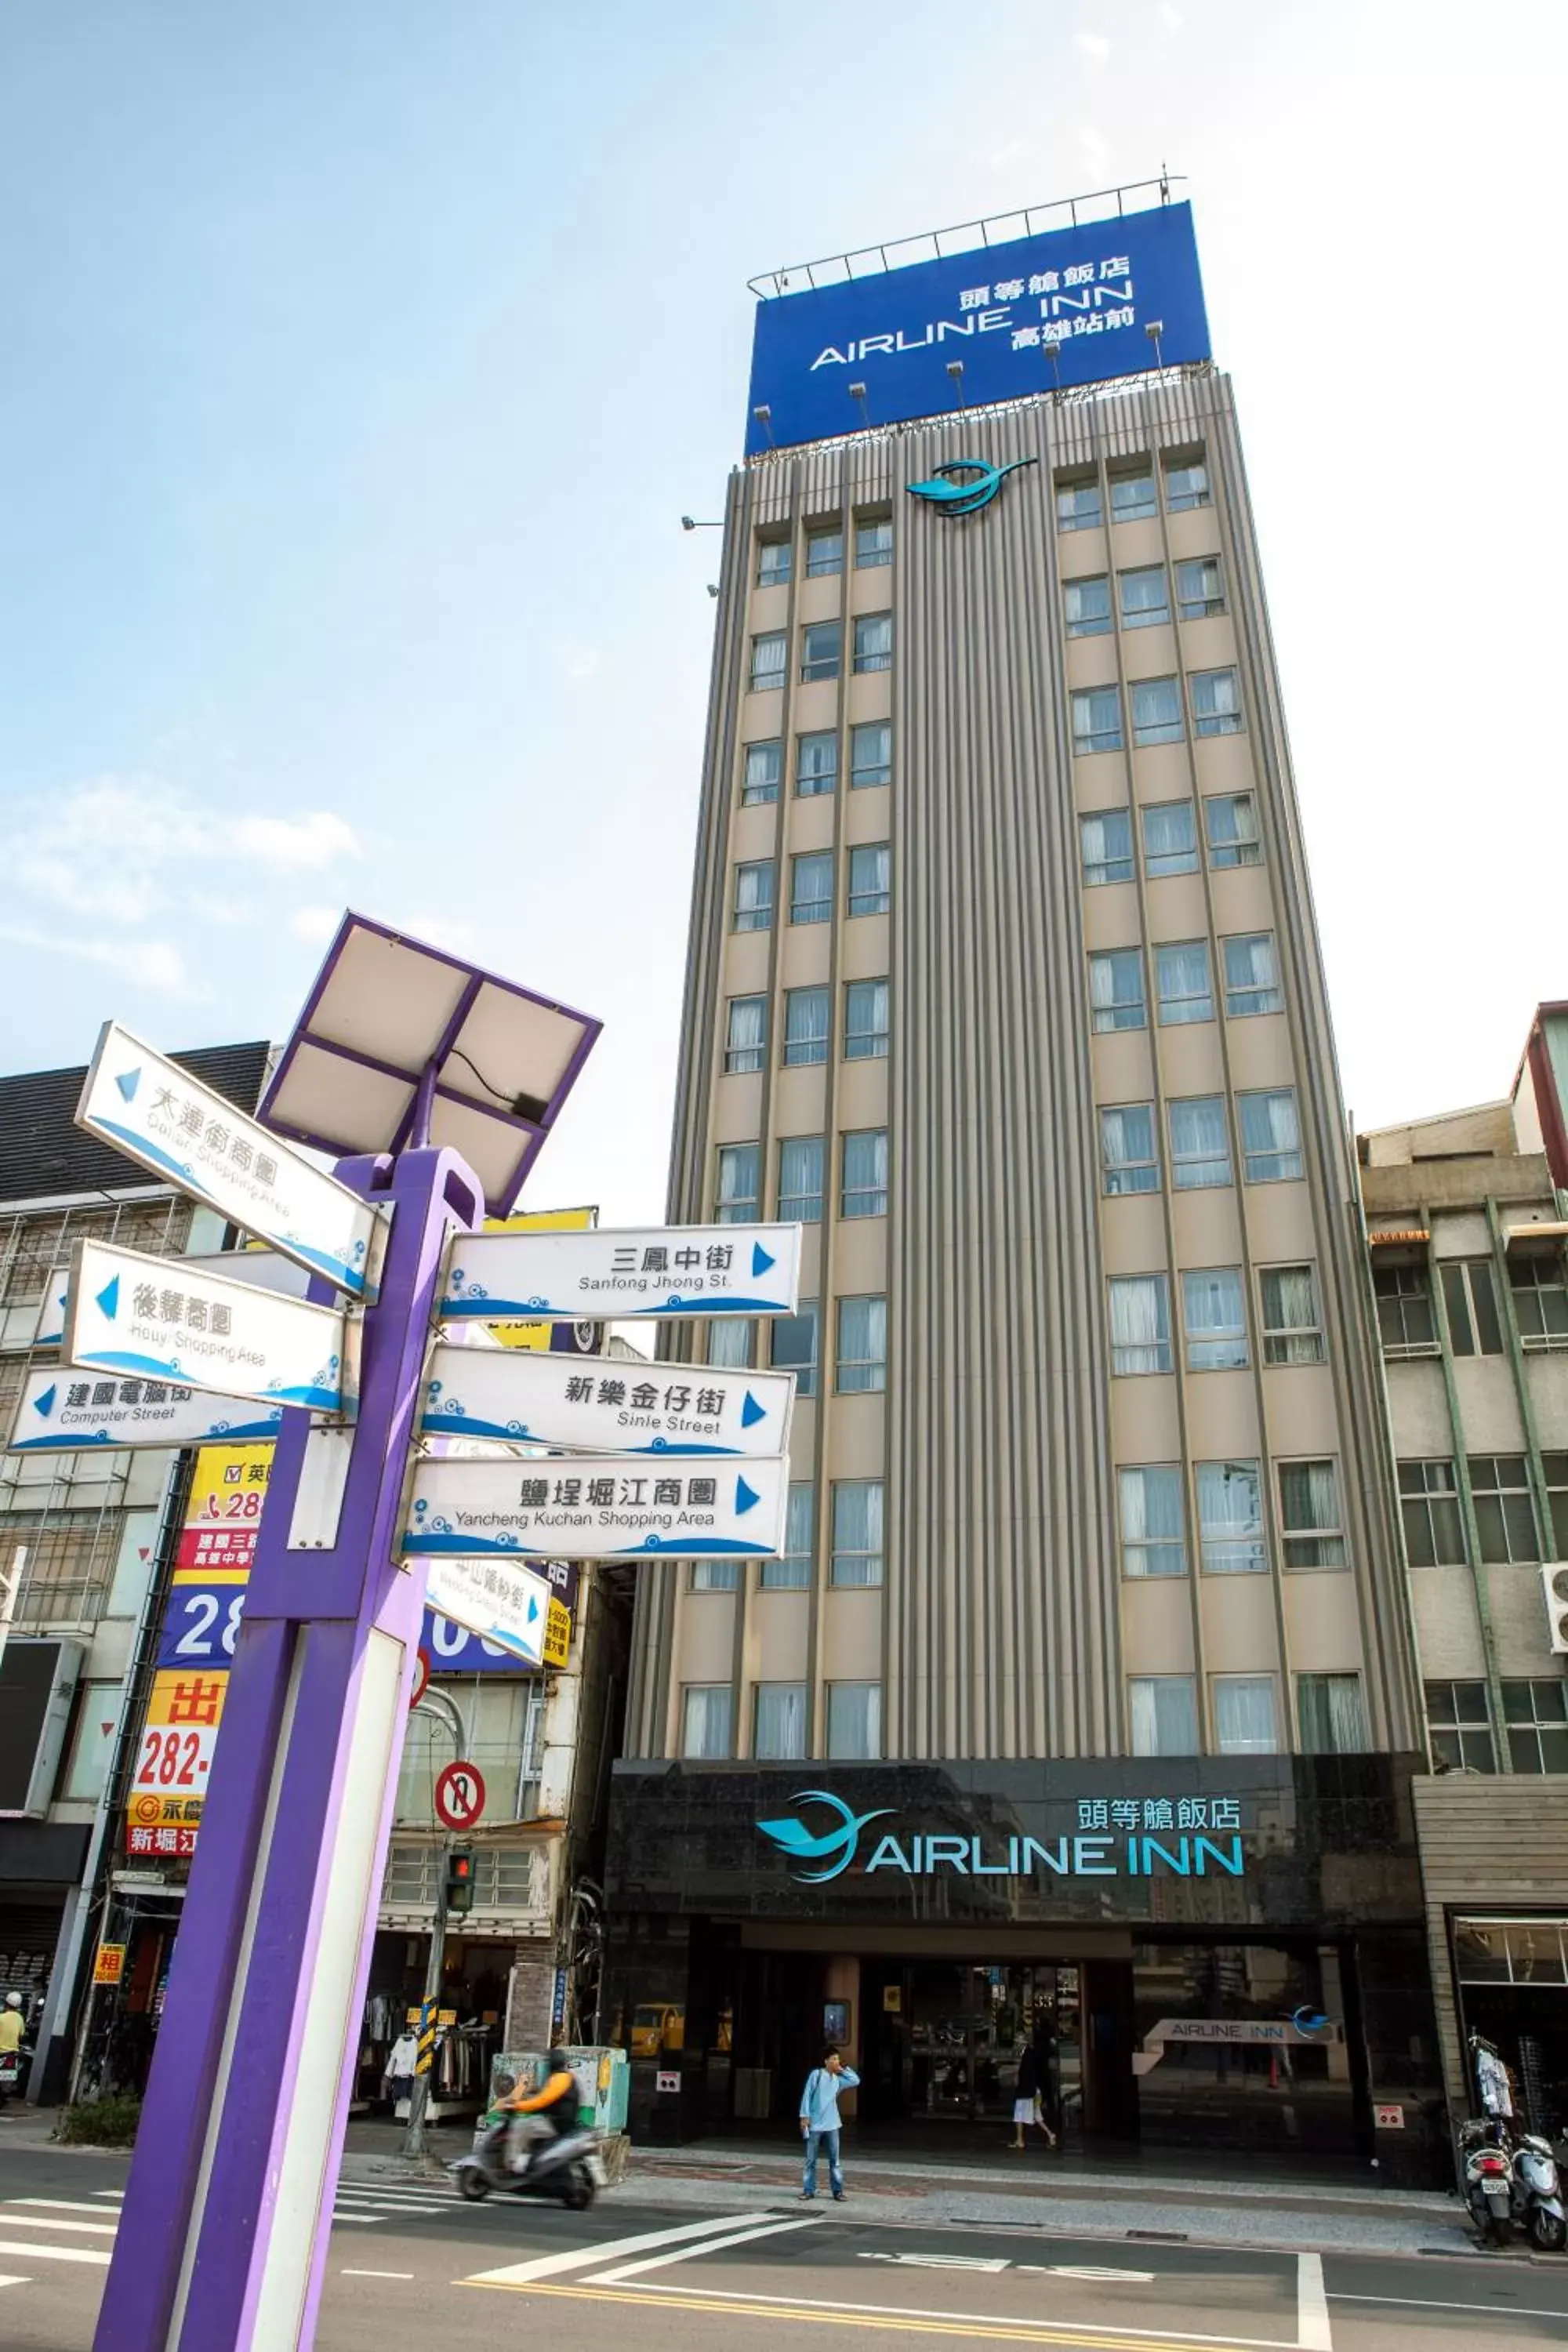 Property Building in Airline Inn - Kaohsiung Station